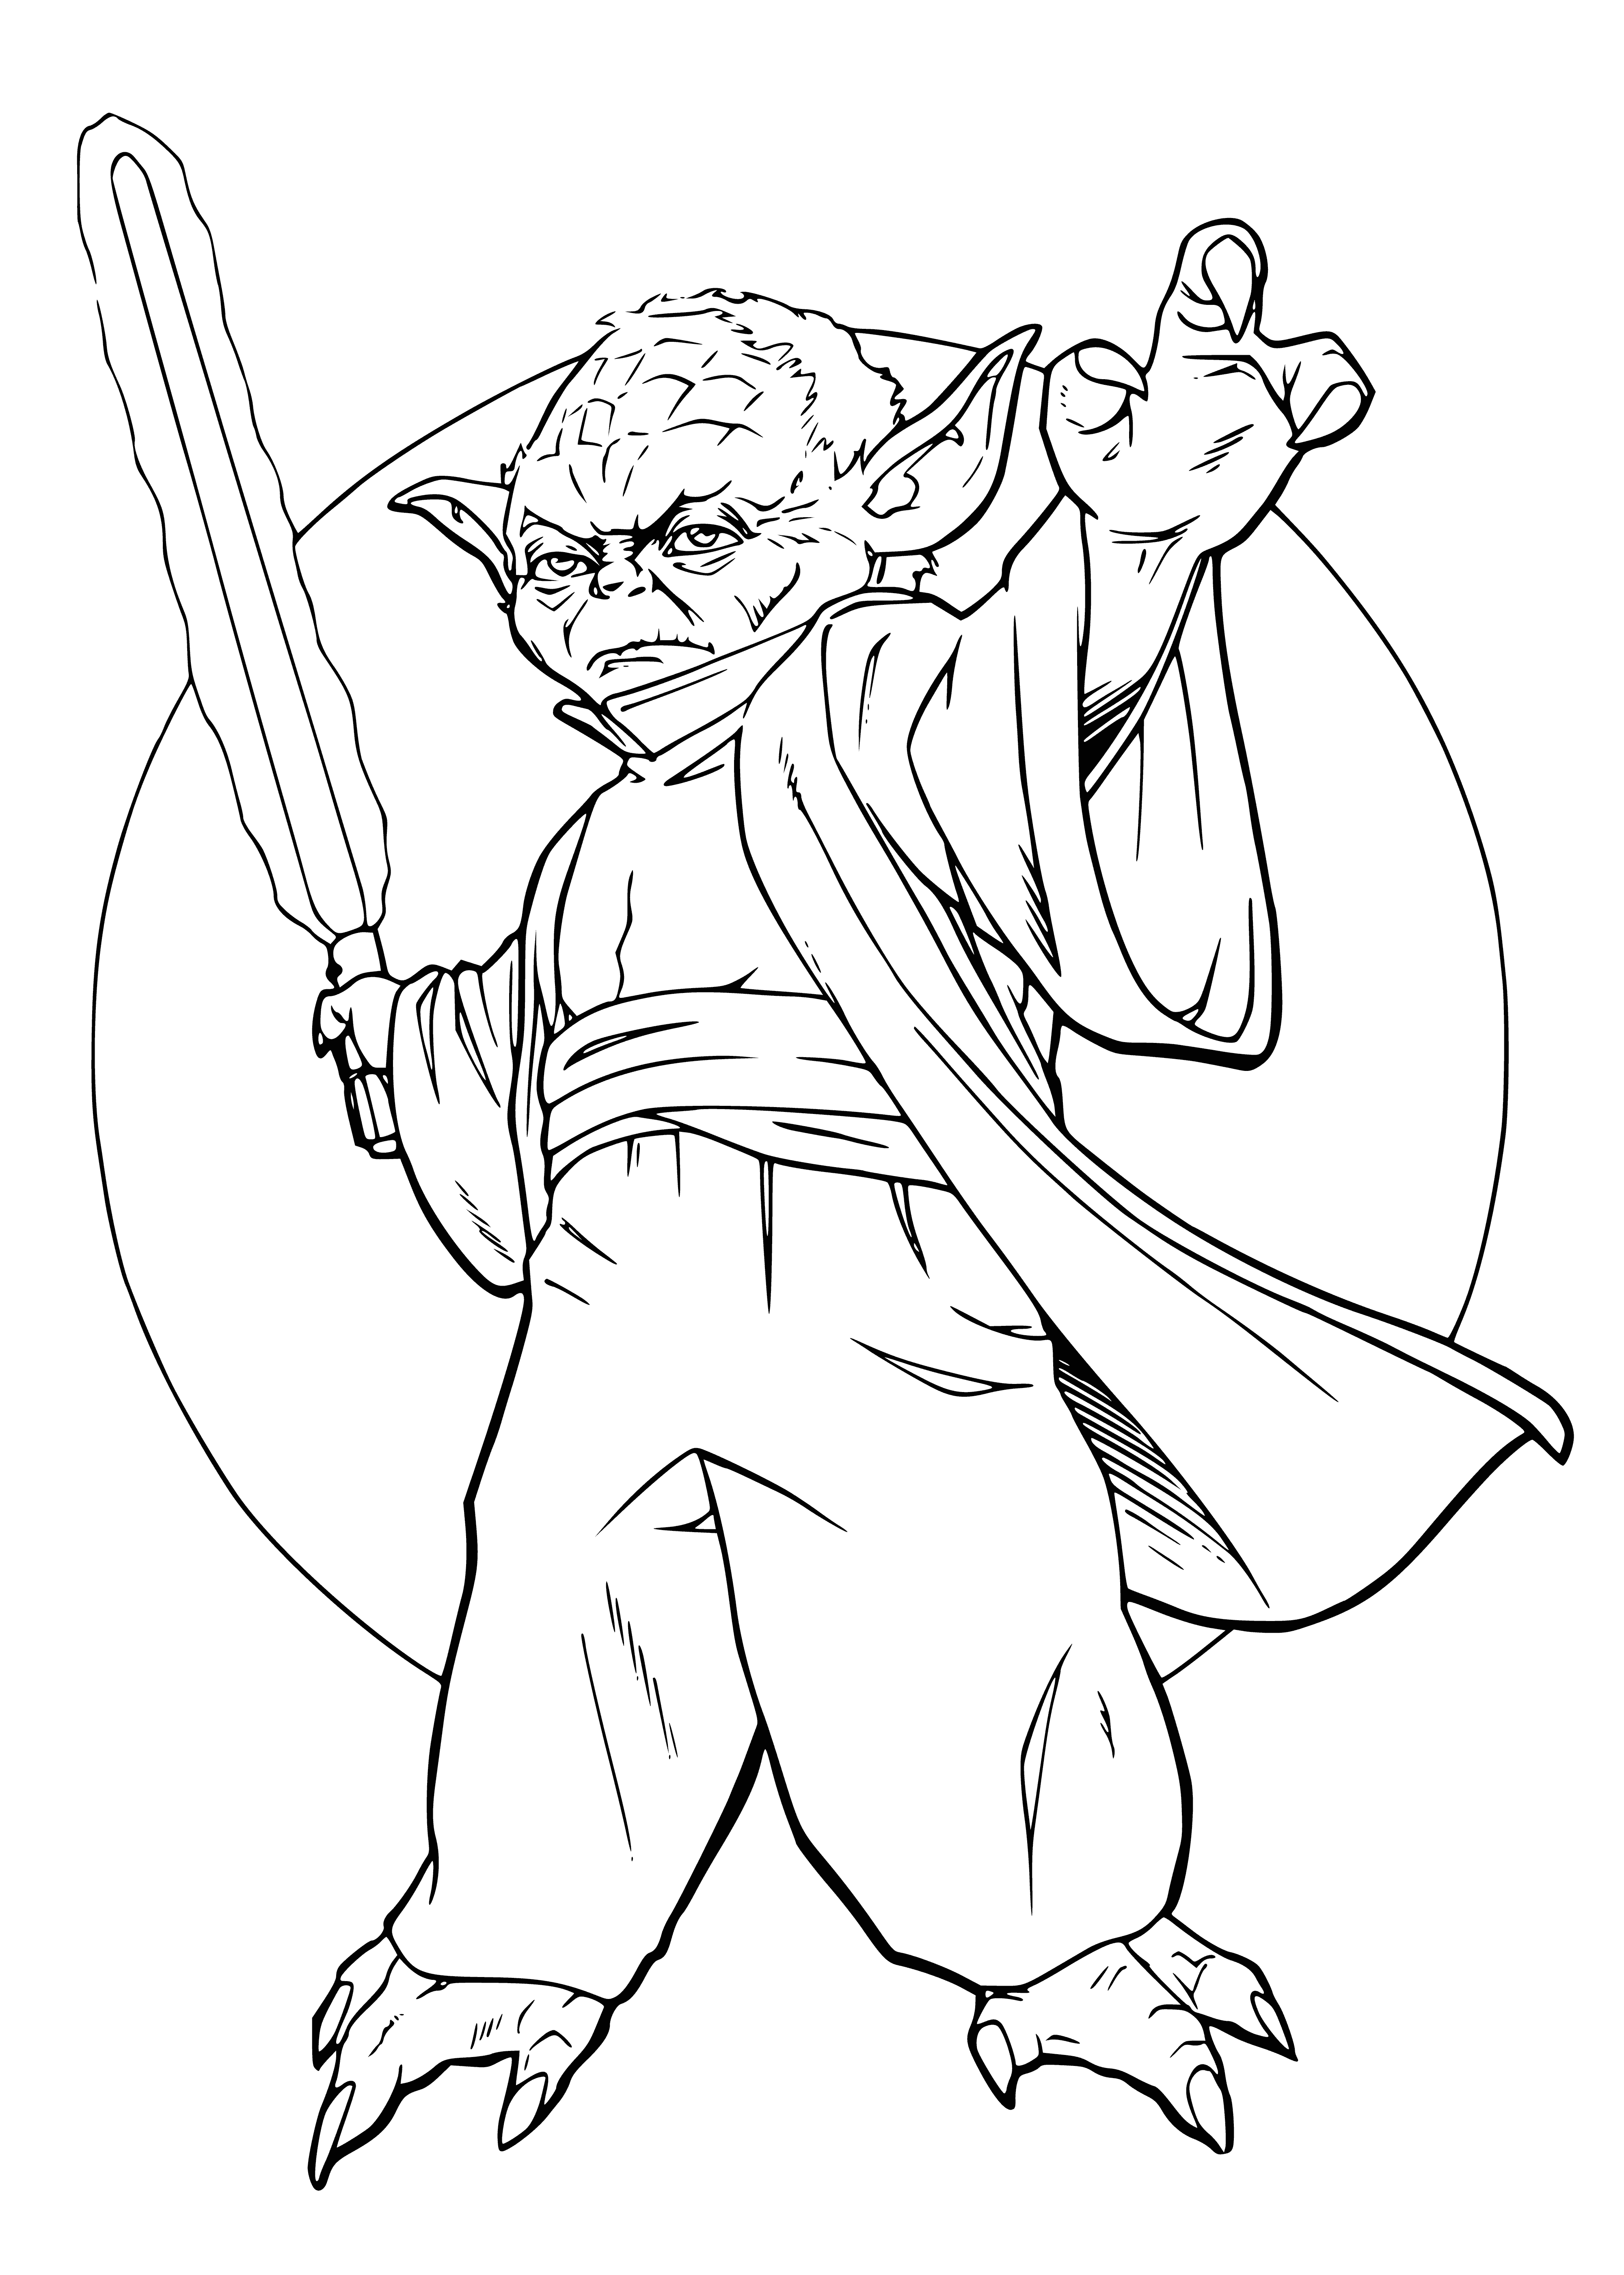 coloring page: Yoda leads clone army to victory in attack on enemy.